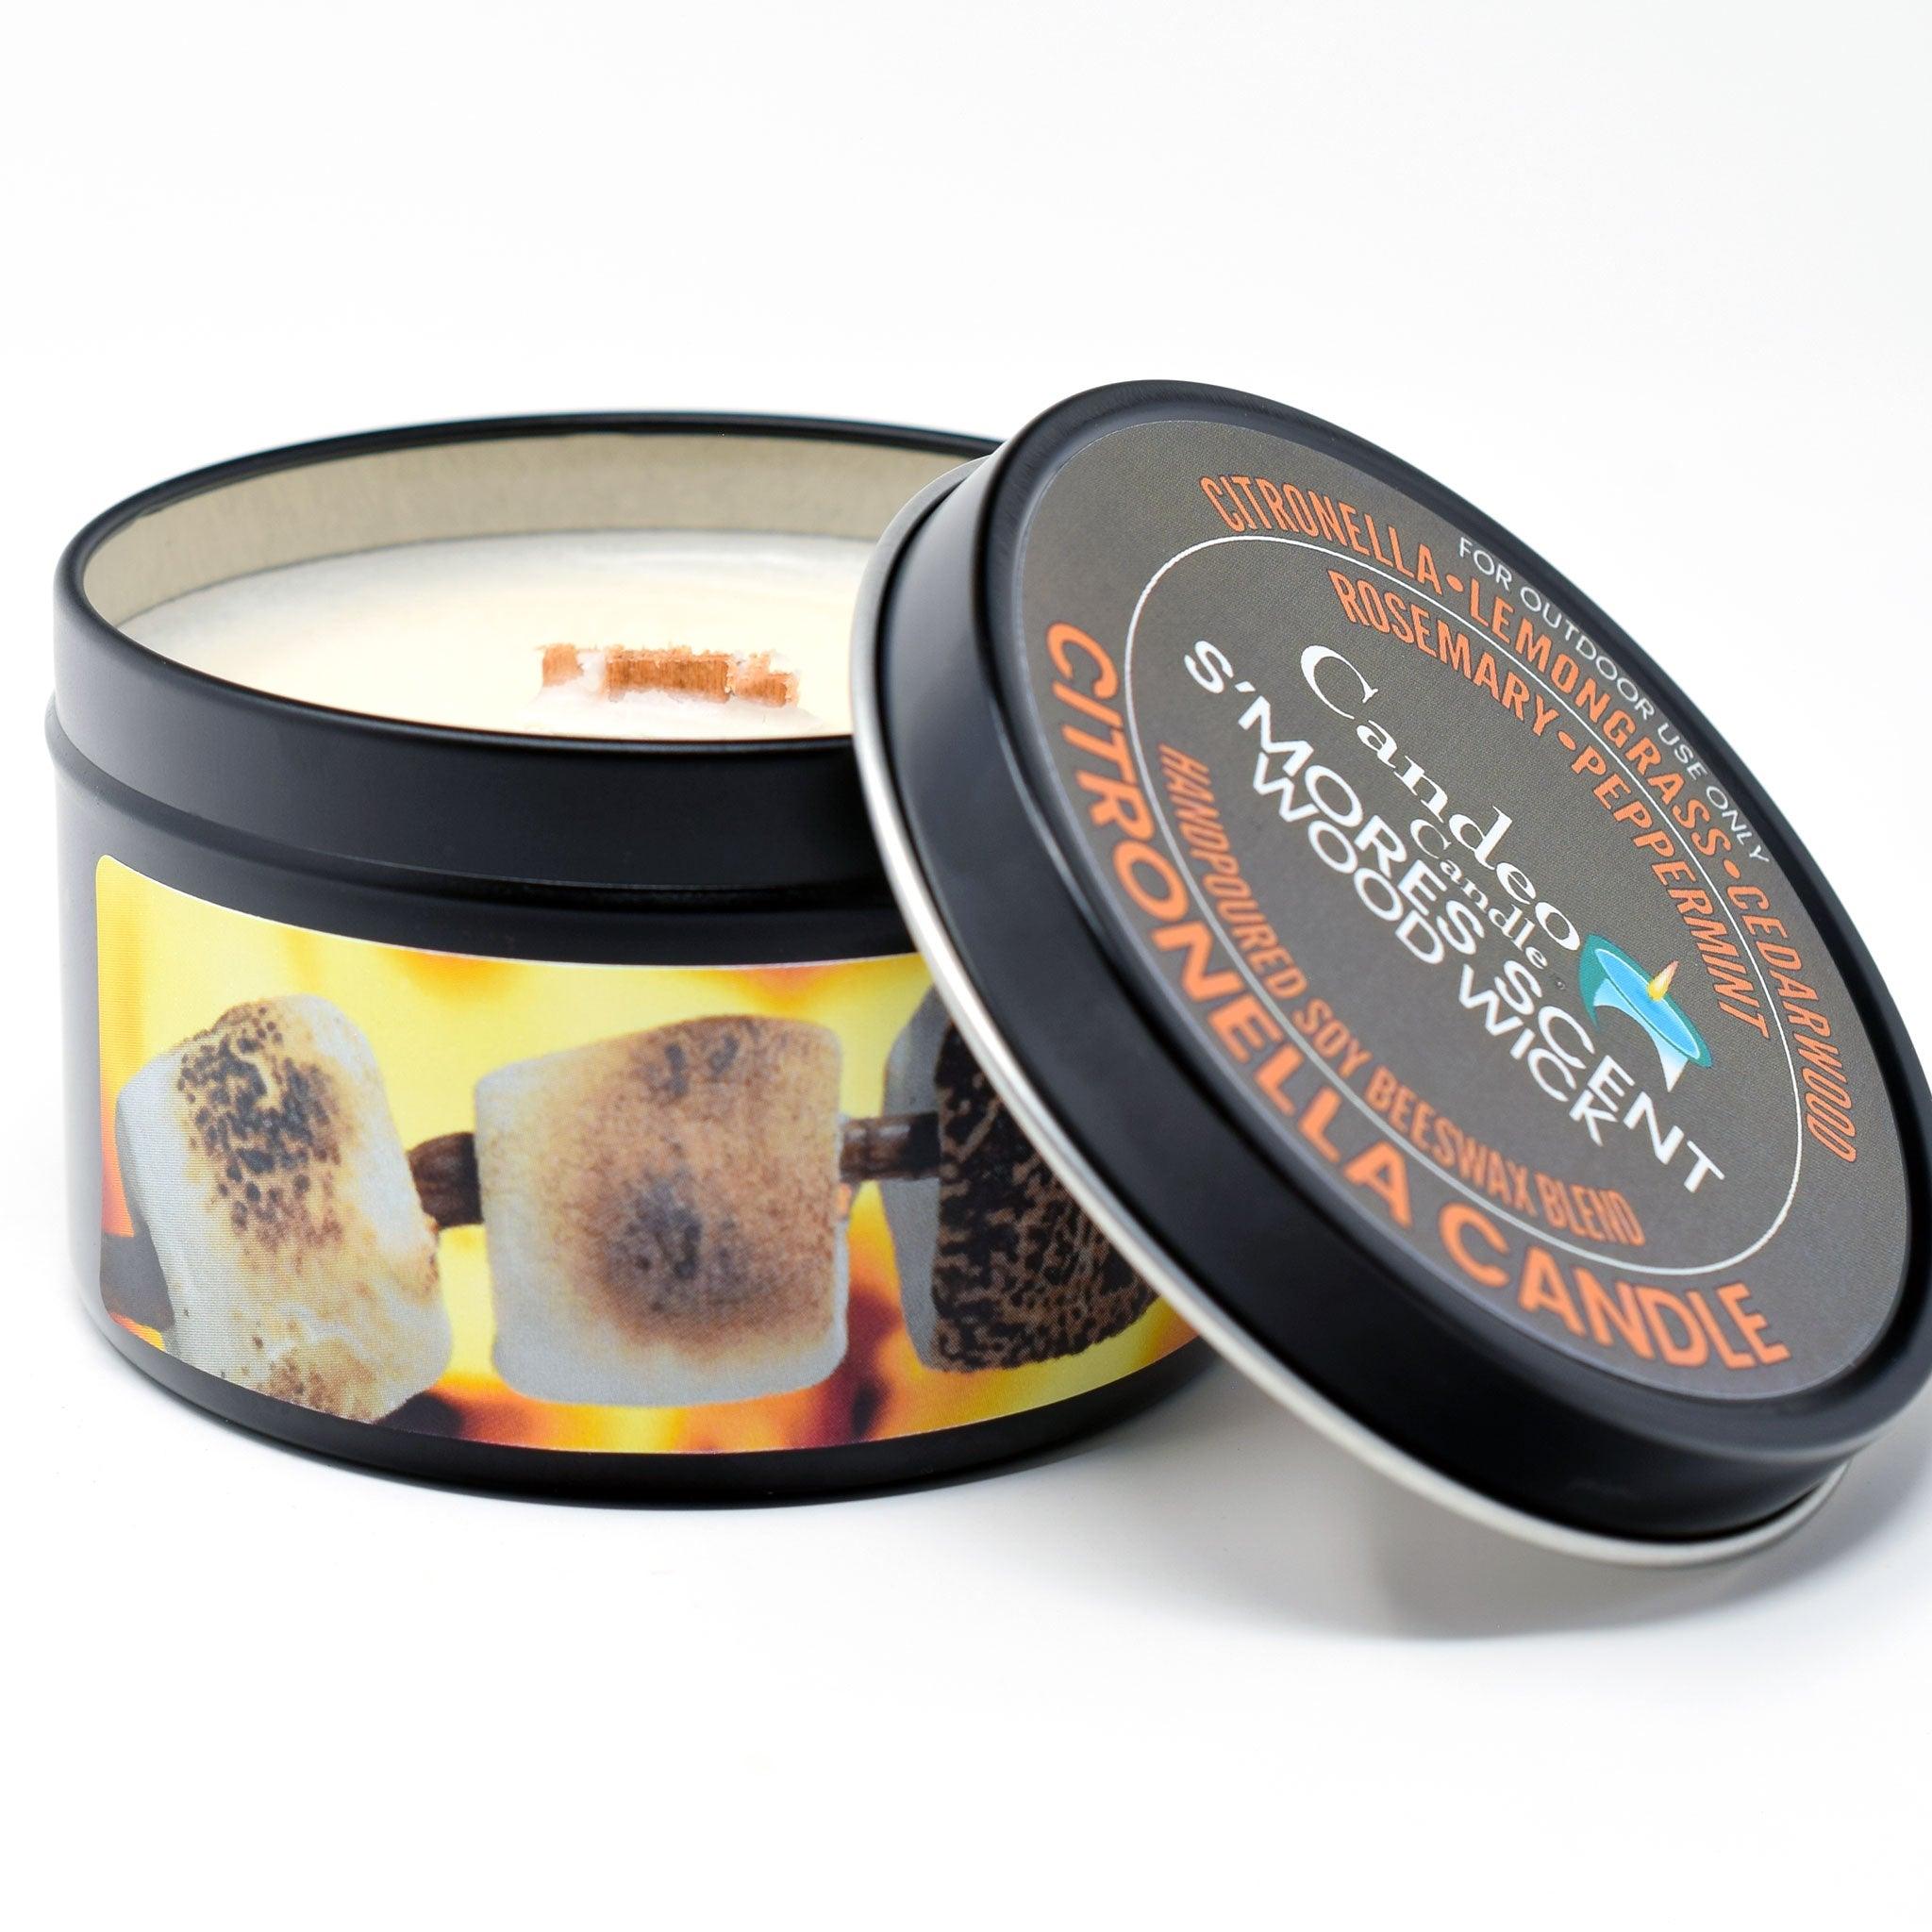 Citronella S'mores Candle, Soy/Beeswax Blend, Wood Wick, 6oz Black Tin - Candeo Candle